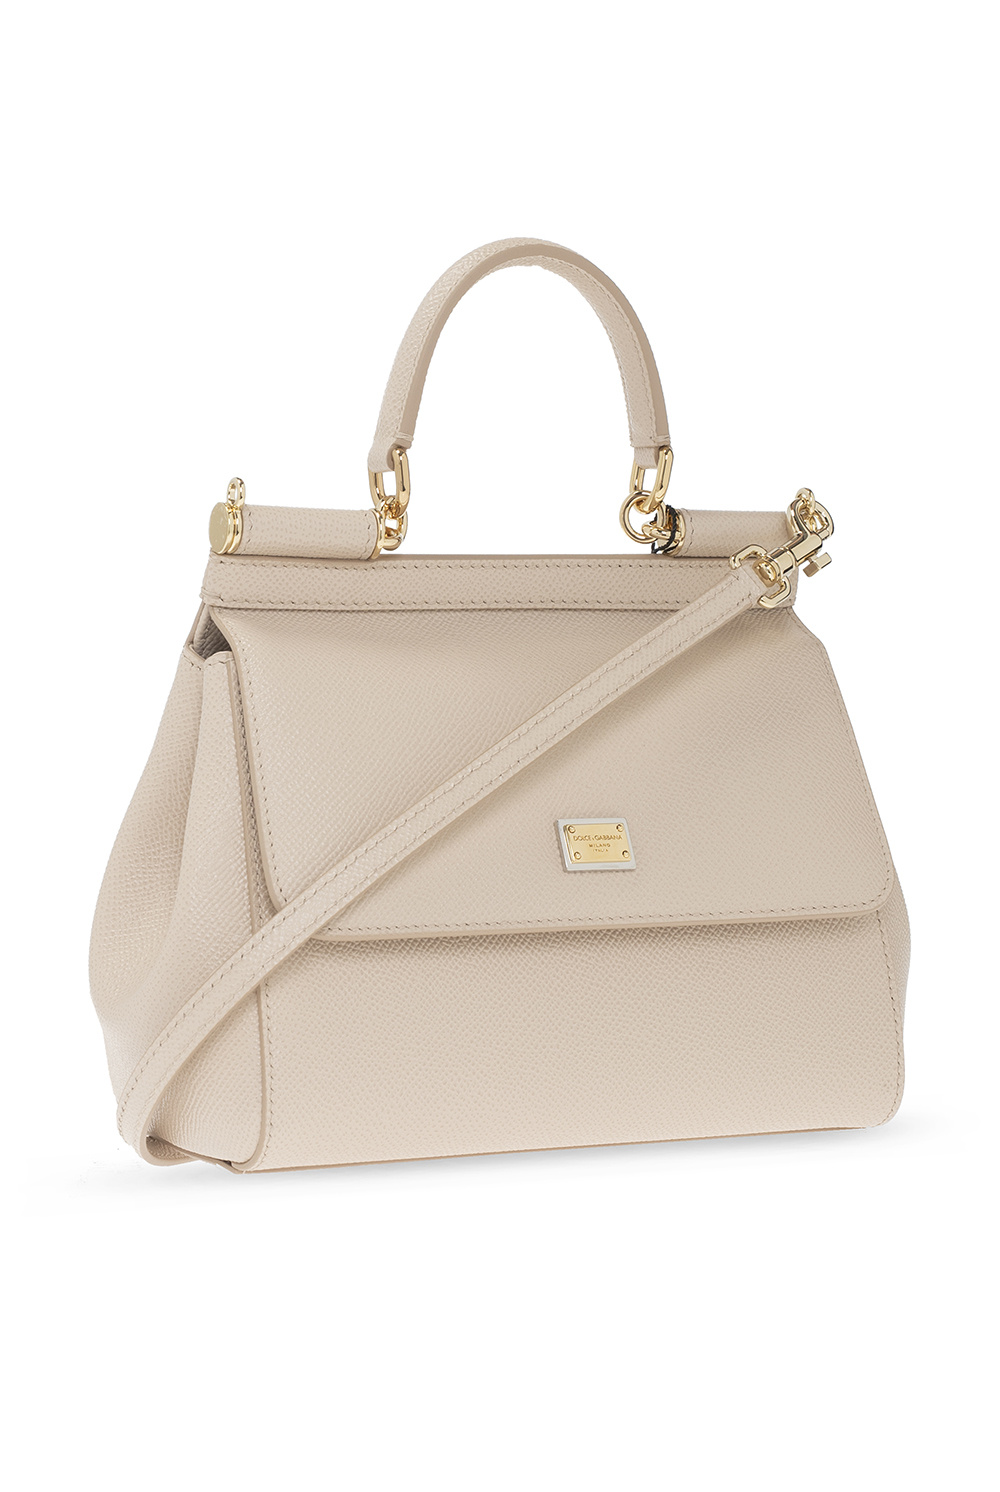 Dolce & Gabbana Hand Bag From The Sicily Line In The Small Size in Natural